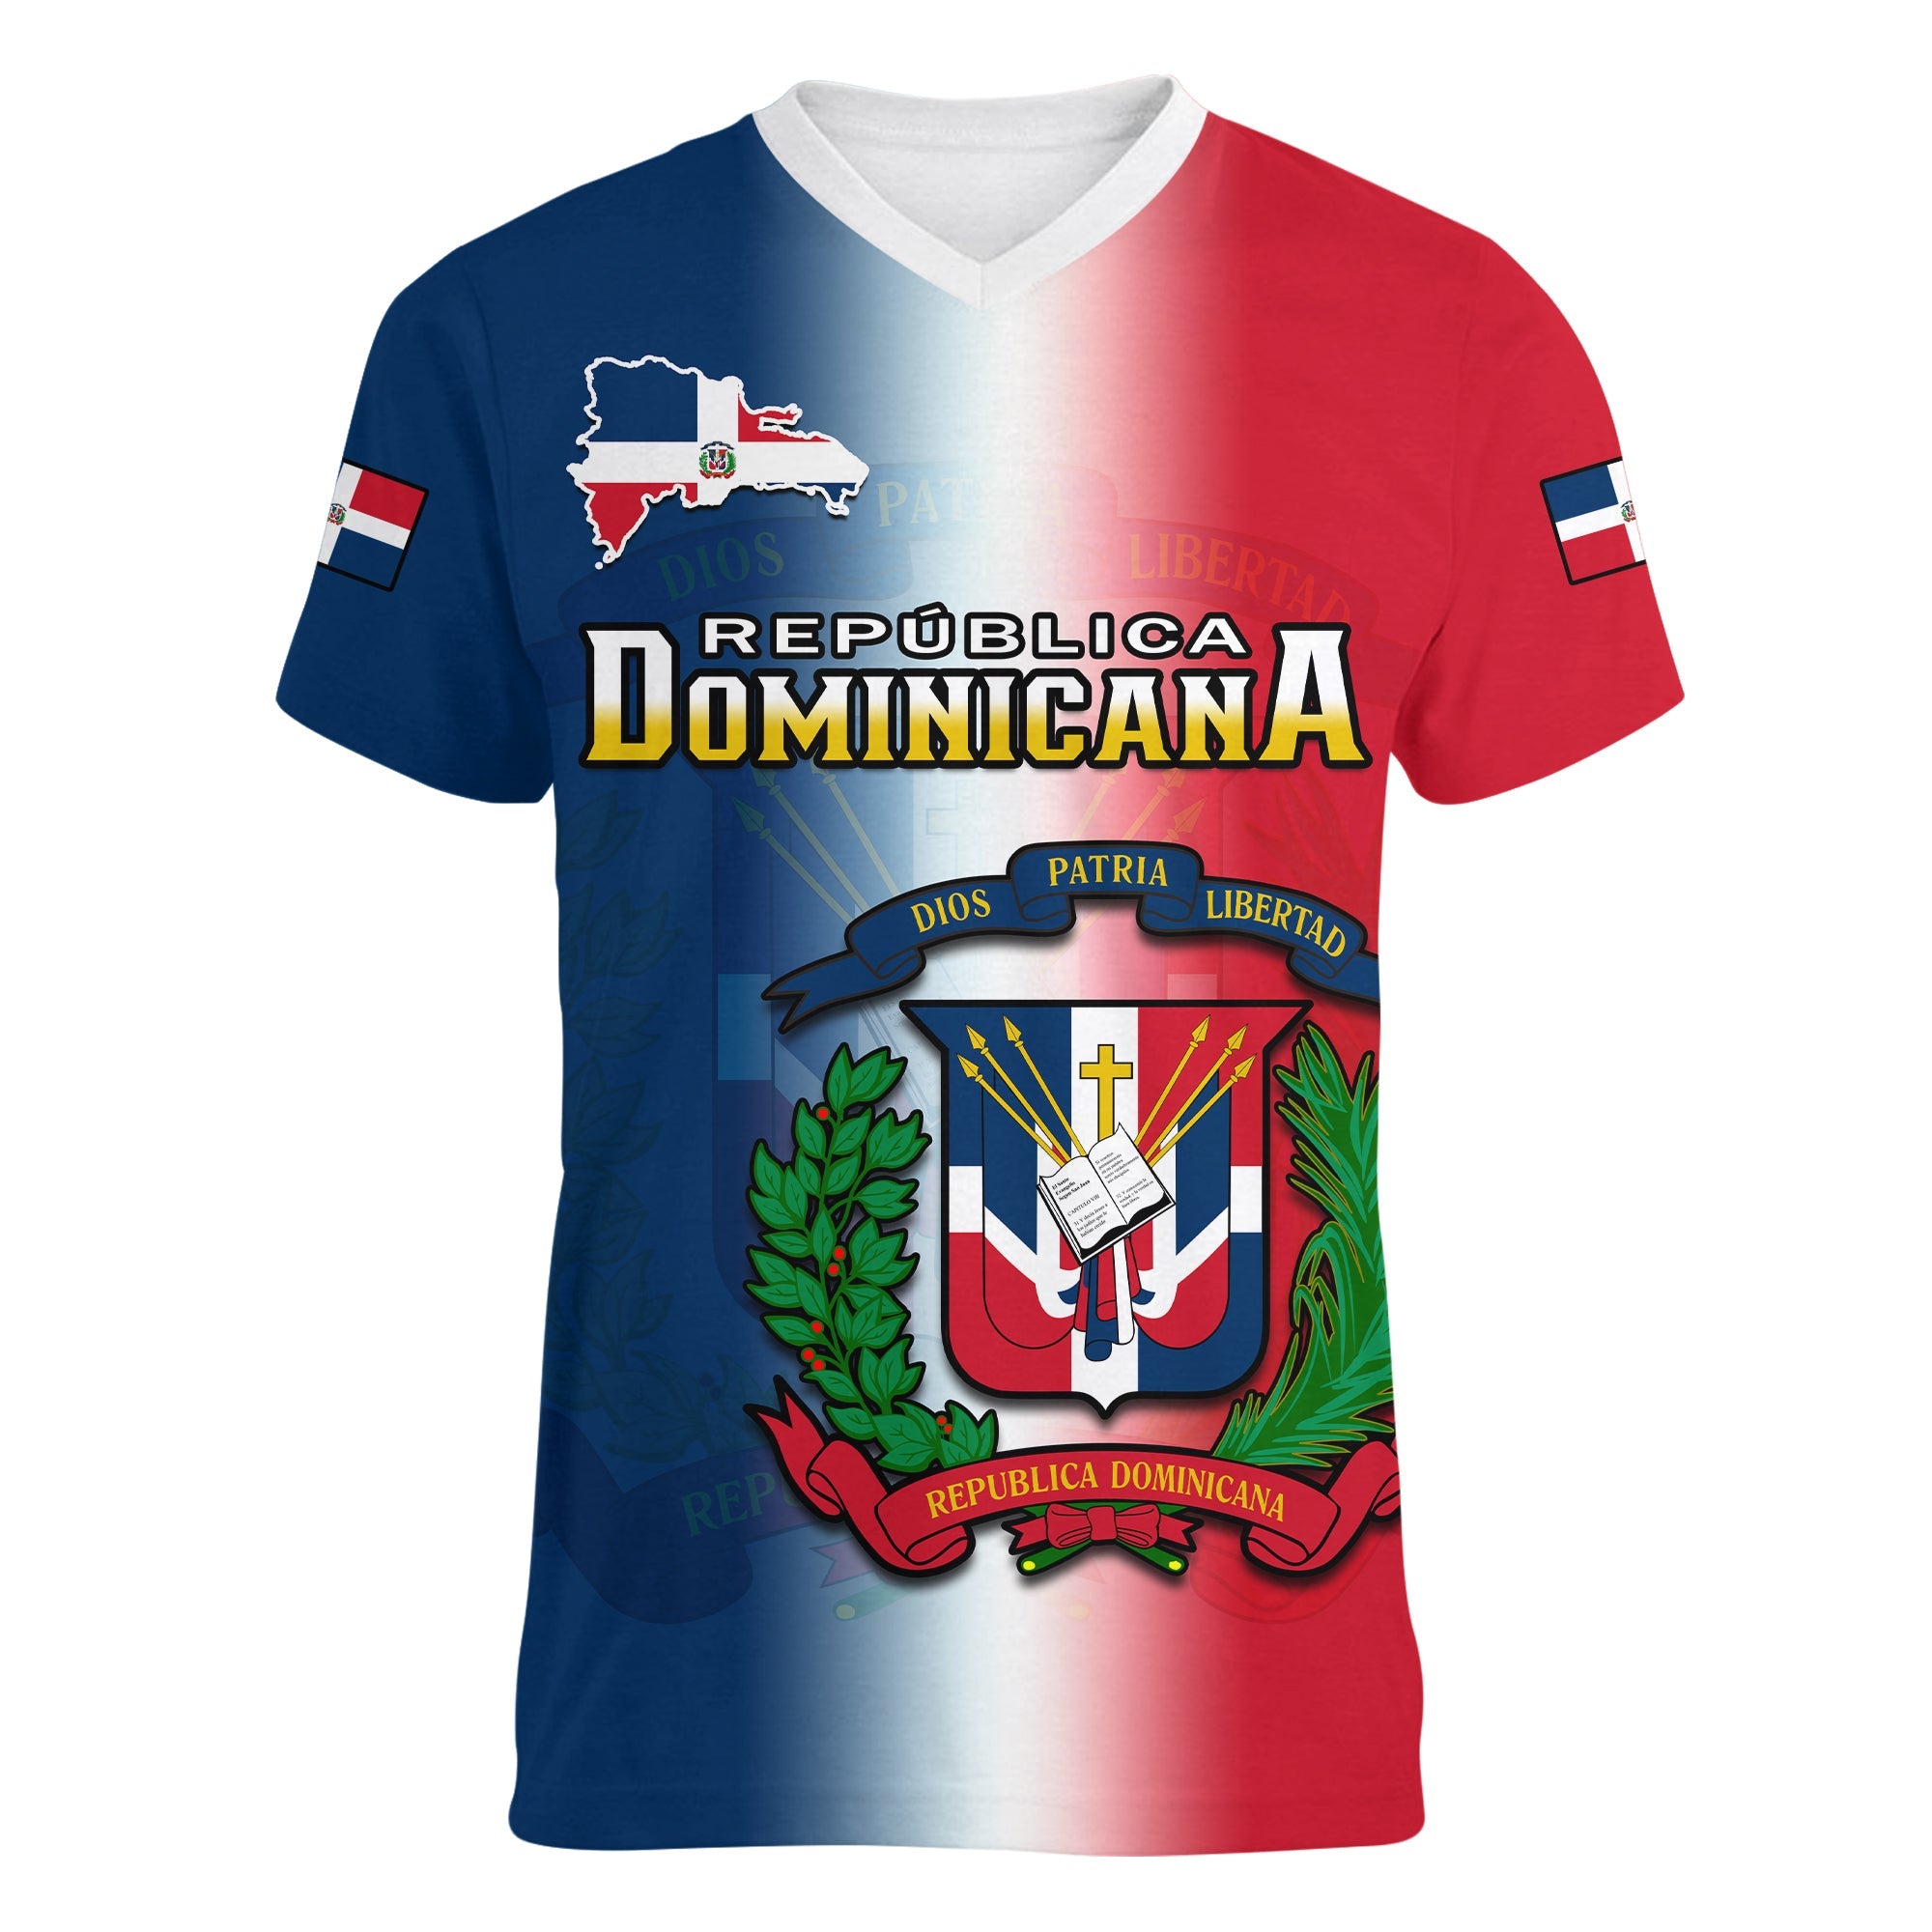 dominican-republic-v-neck-t-shirt-dominicana-coat-of-arms-gradient-style